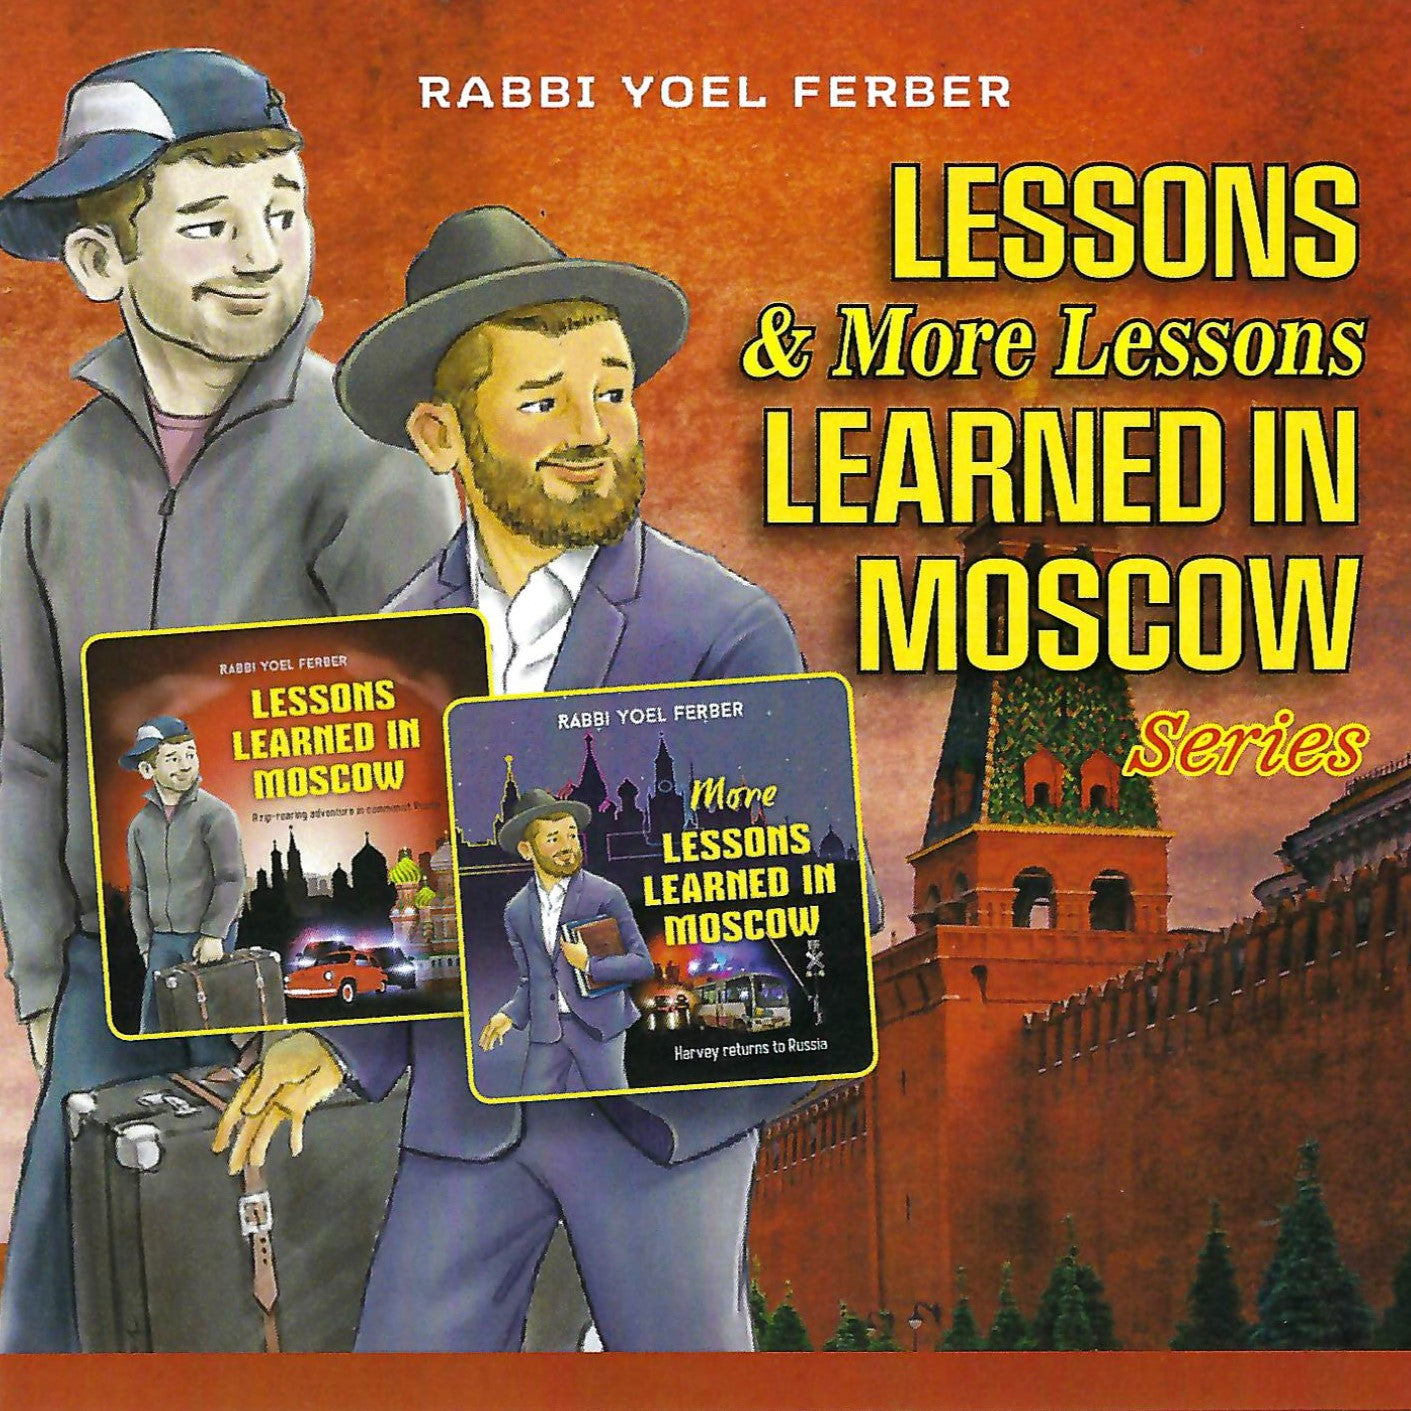 Rabbi Yoel Ferber - Lessons Learned In Moscow Series (USB)